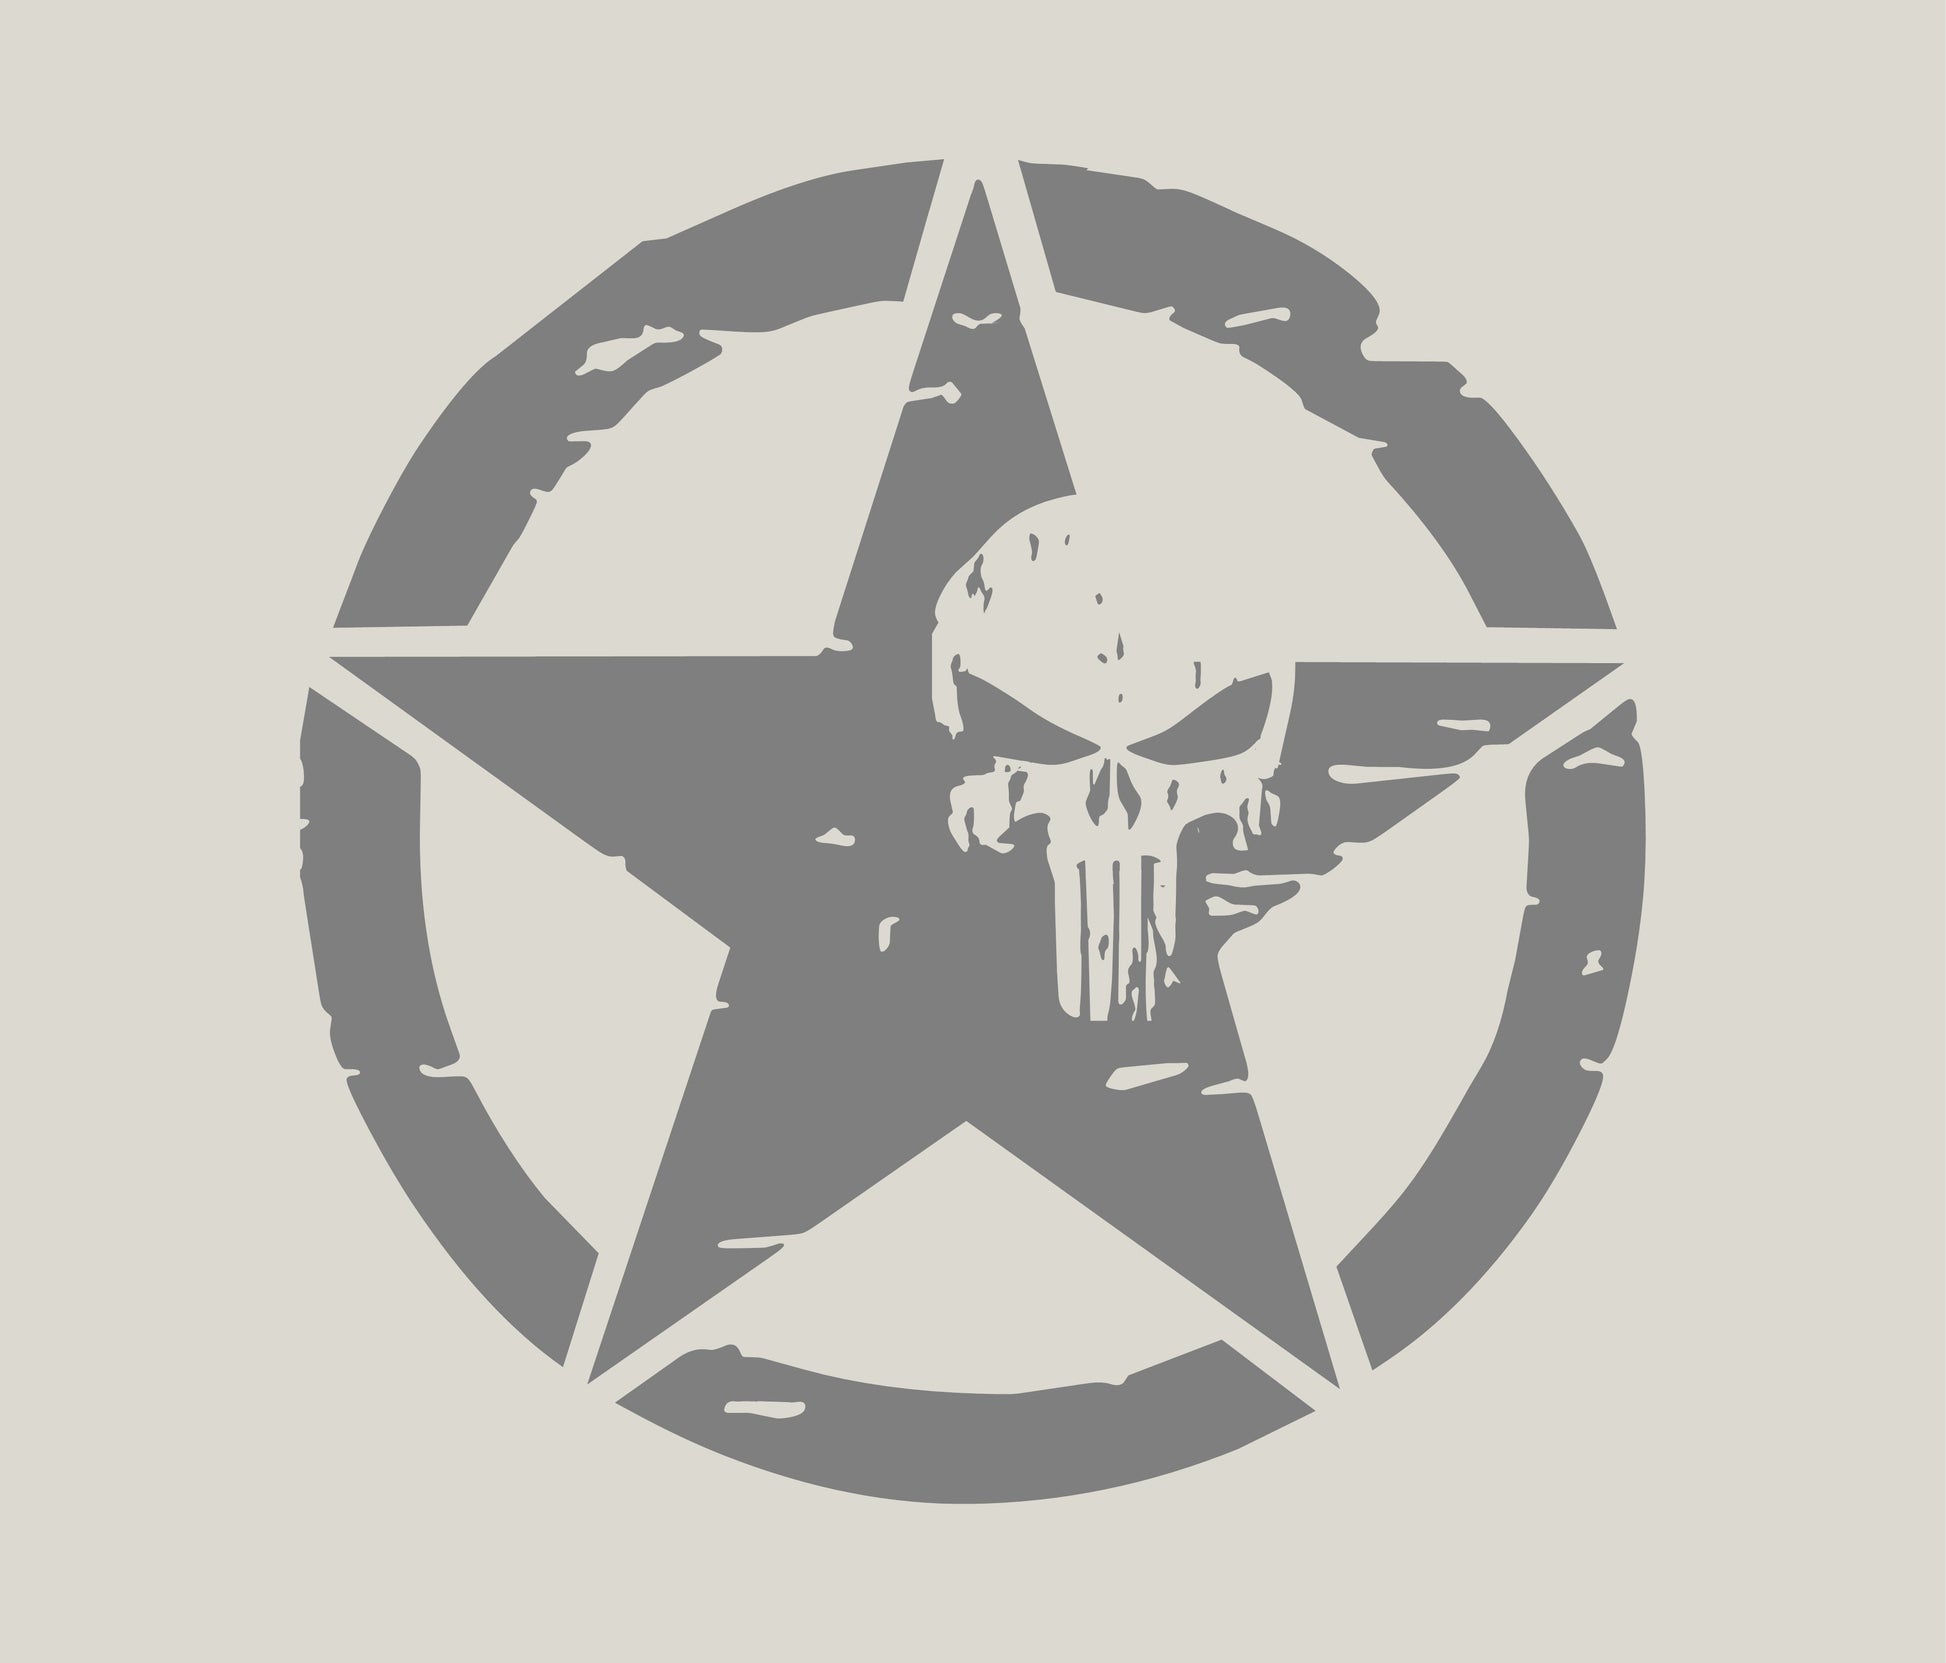 Punisher Decal ALL SIZES Punisher Sticker Choose Color